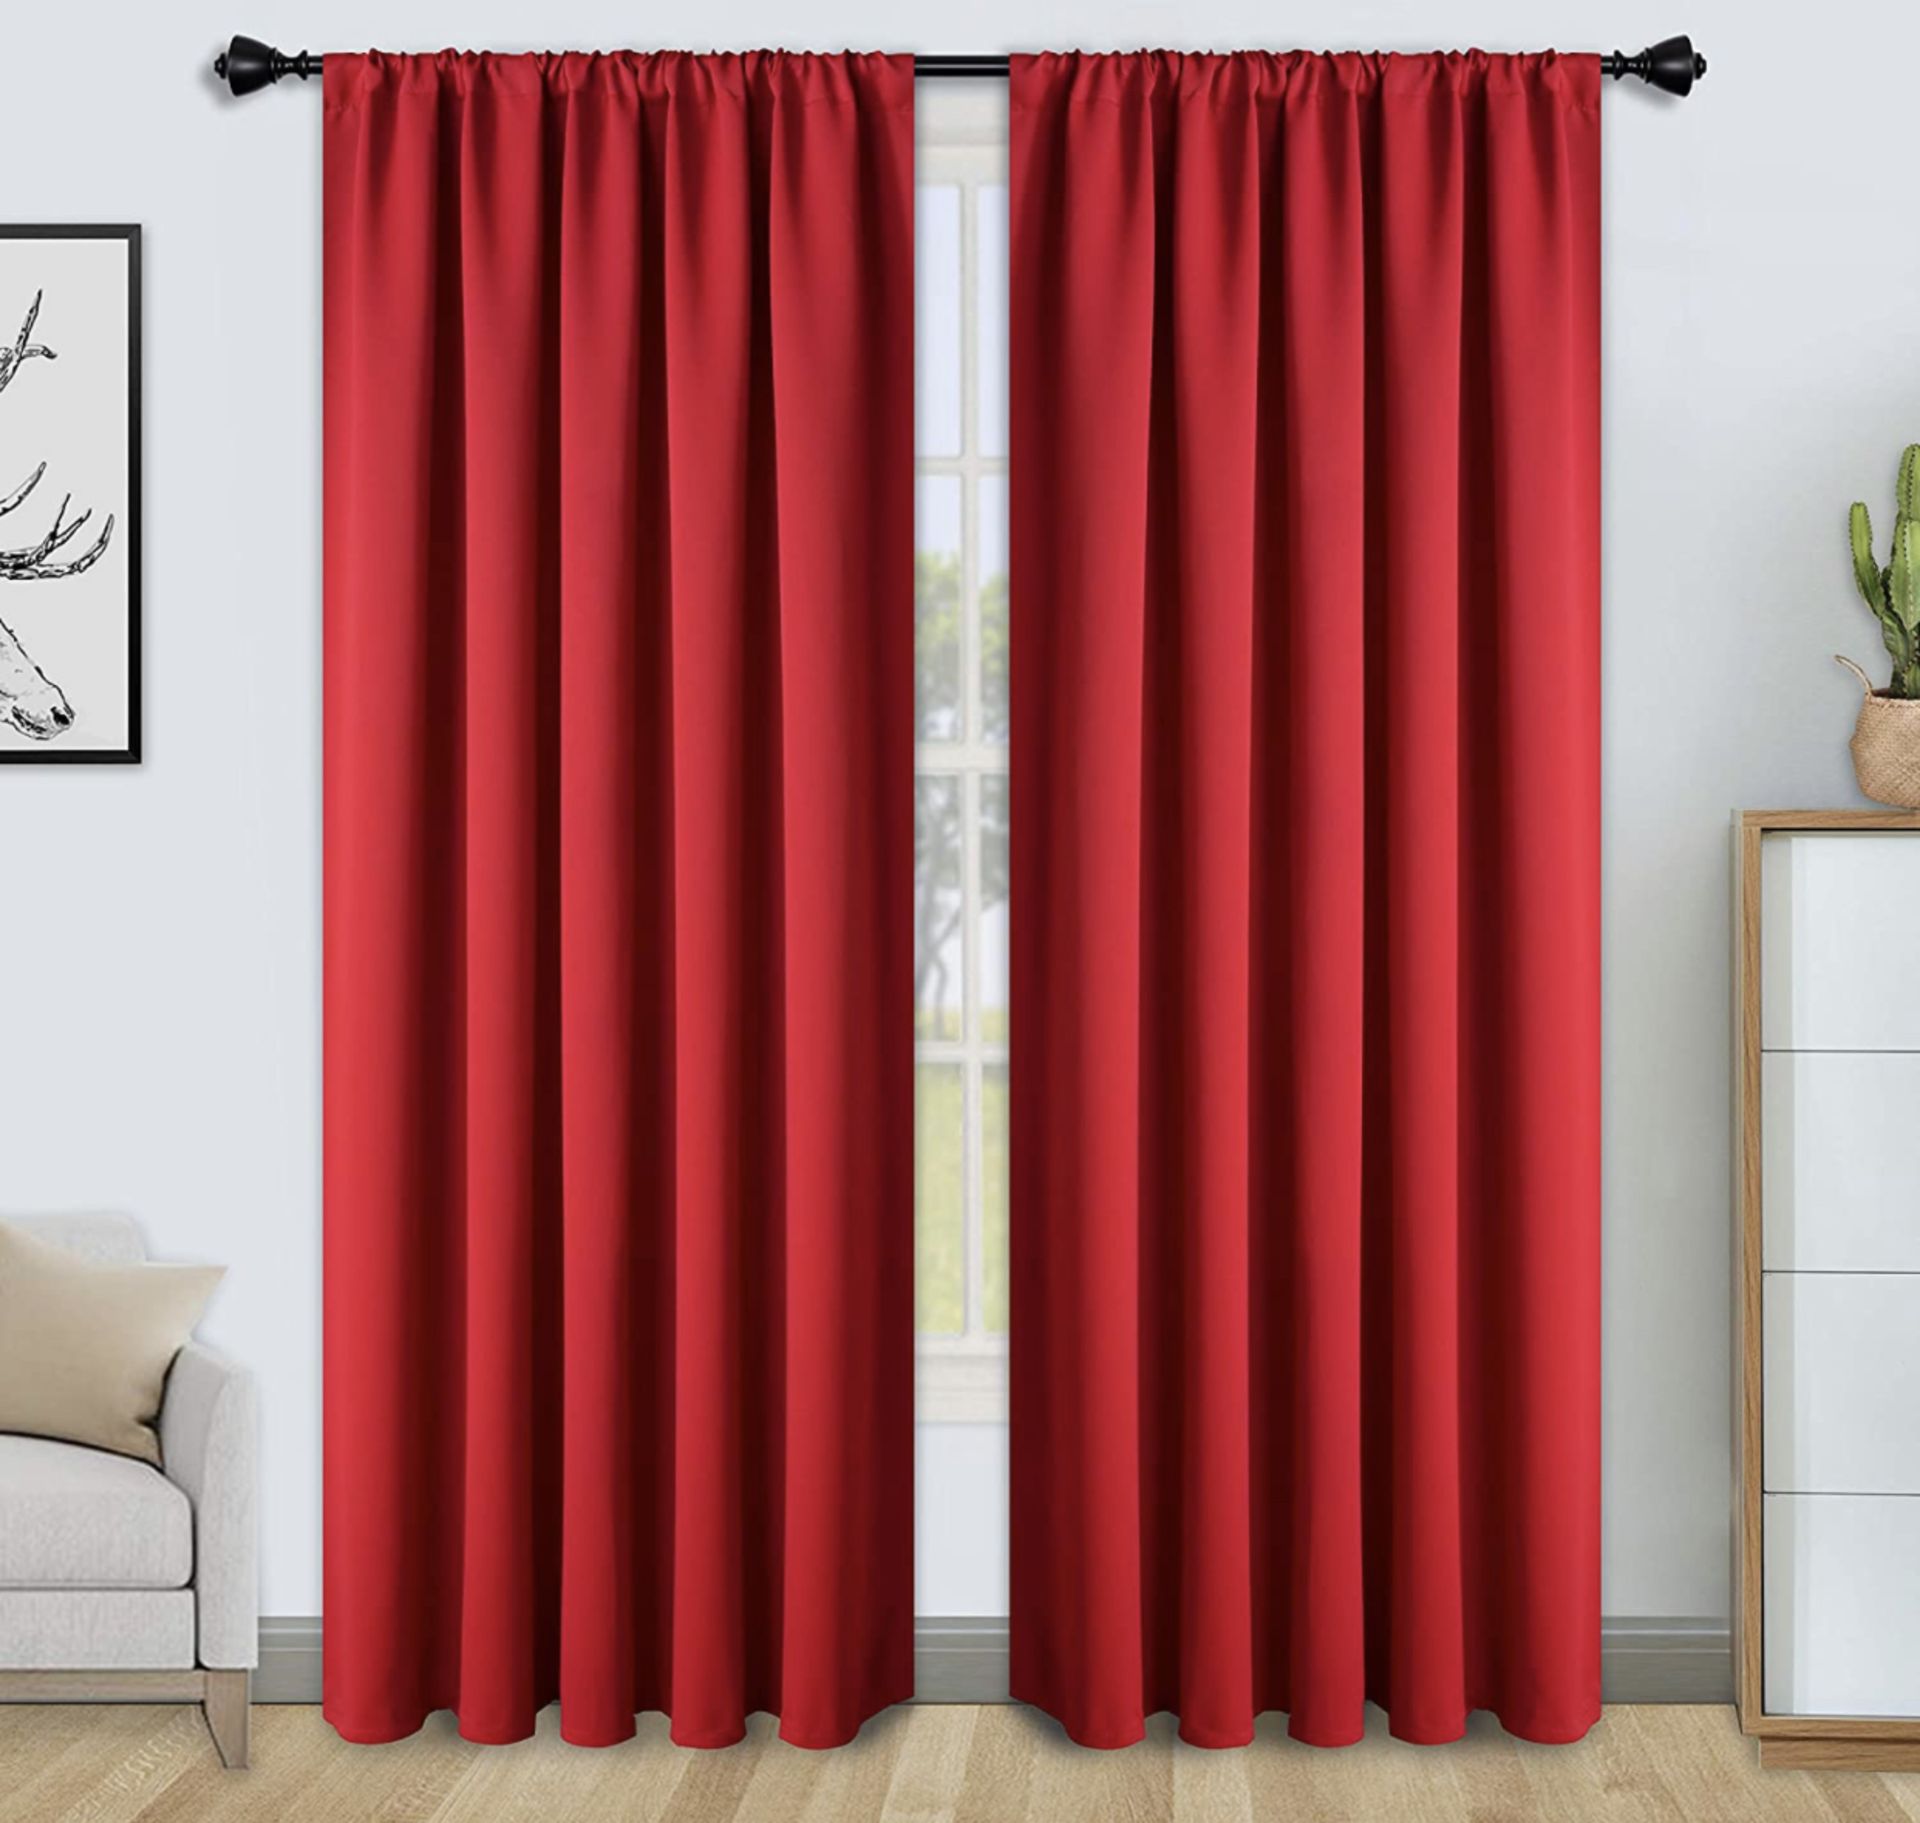 RRP £36.99 Floweroom Blackout Curtains Thermal Insulated Rod Pocket Curtains, 168cm x 229cm